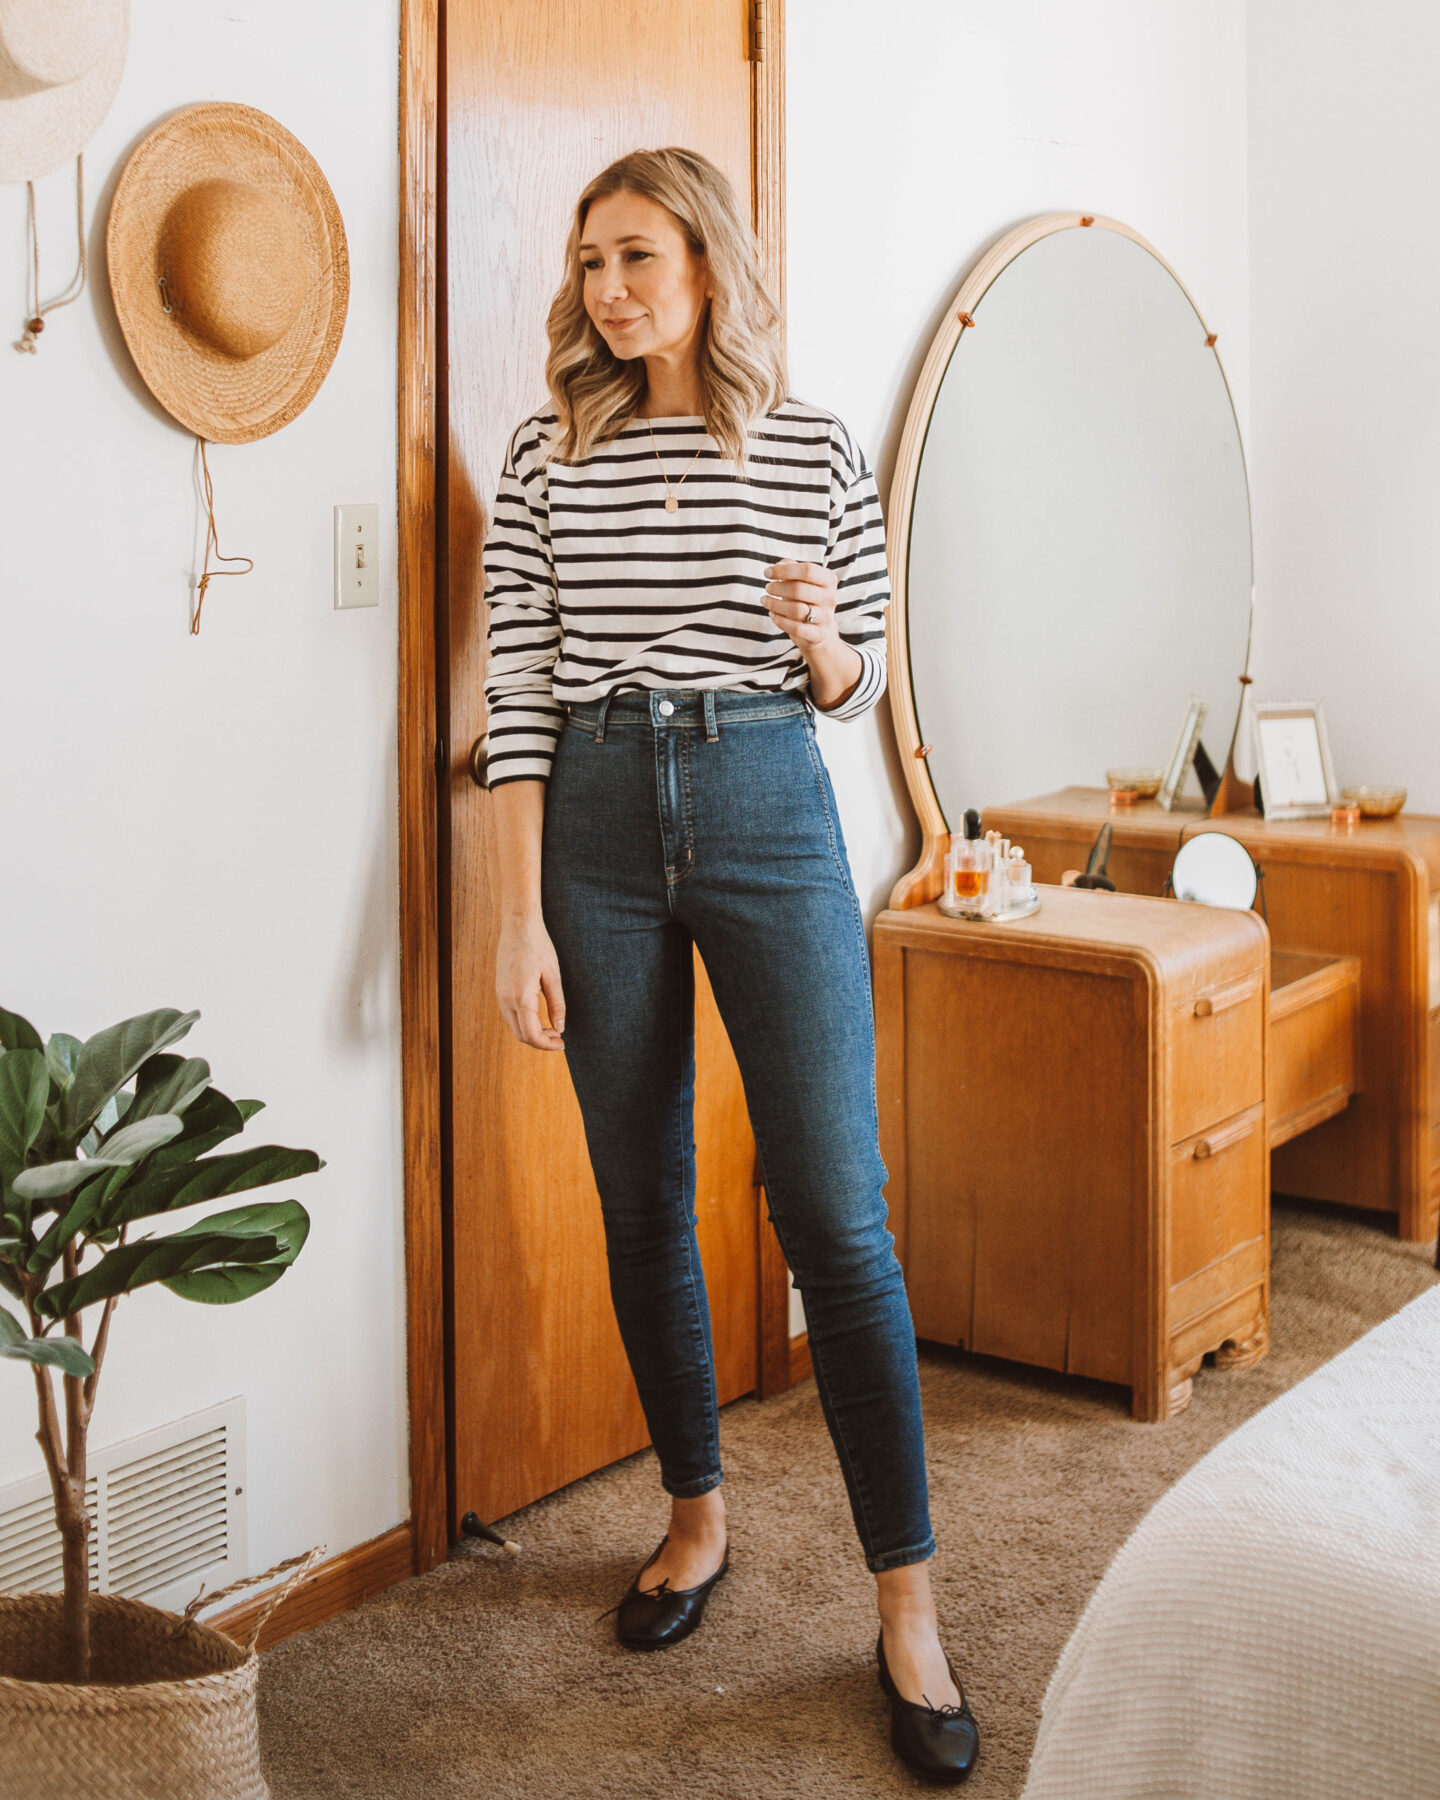 Karin Emily wears a black and white striped long sleeve tee, Everlane way high skinny jeans, and a pair of black ballet flats